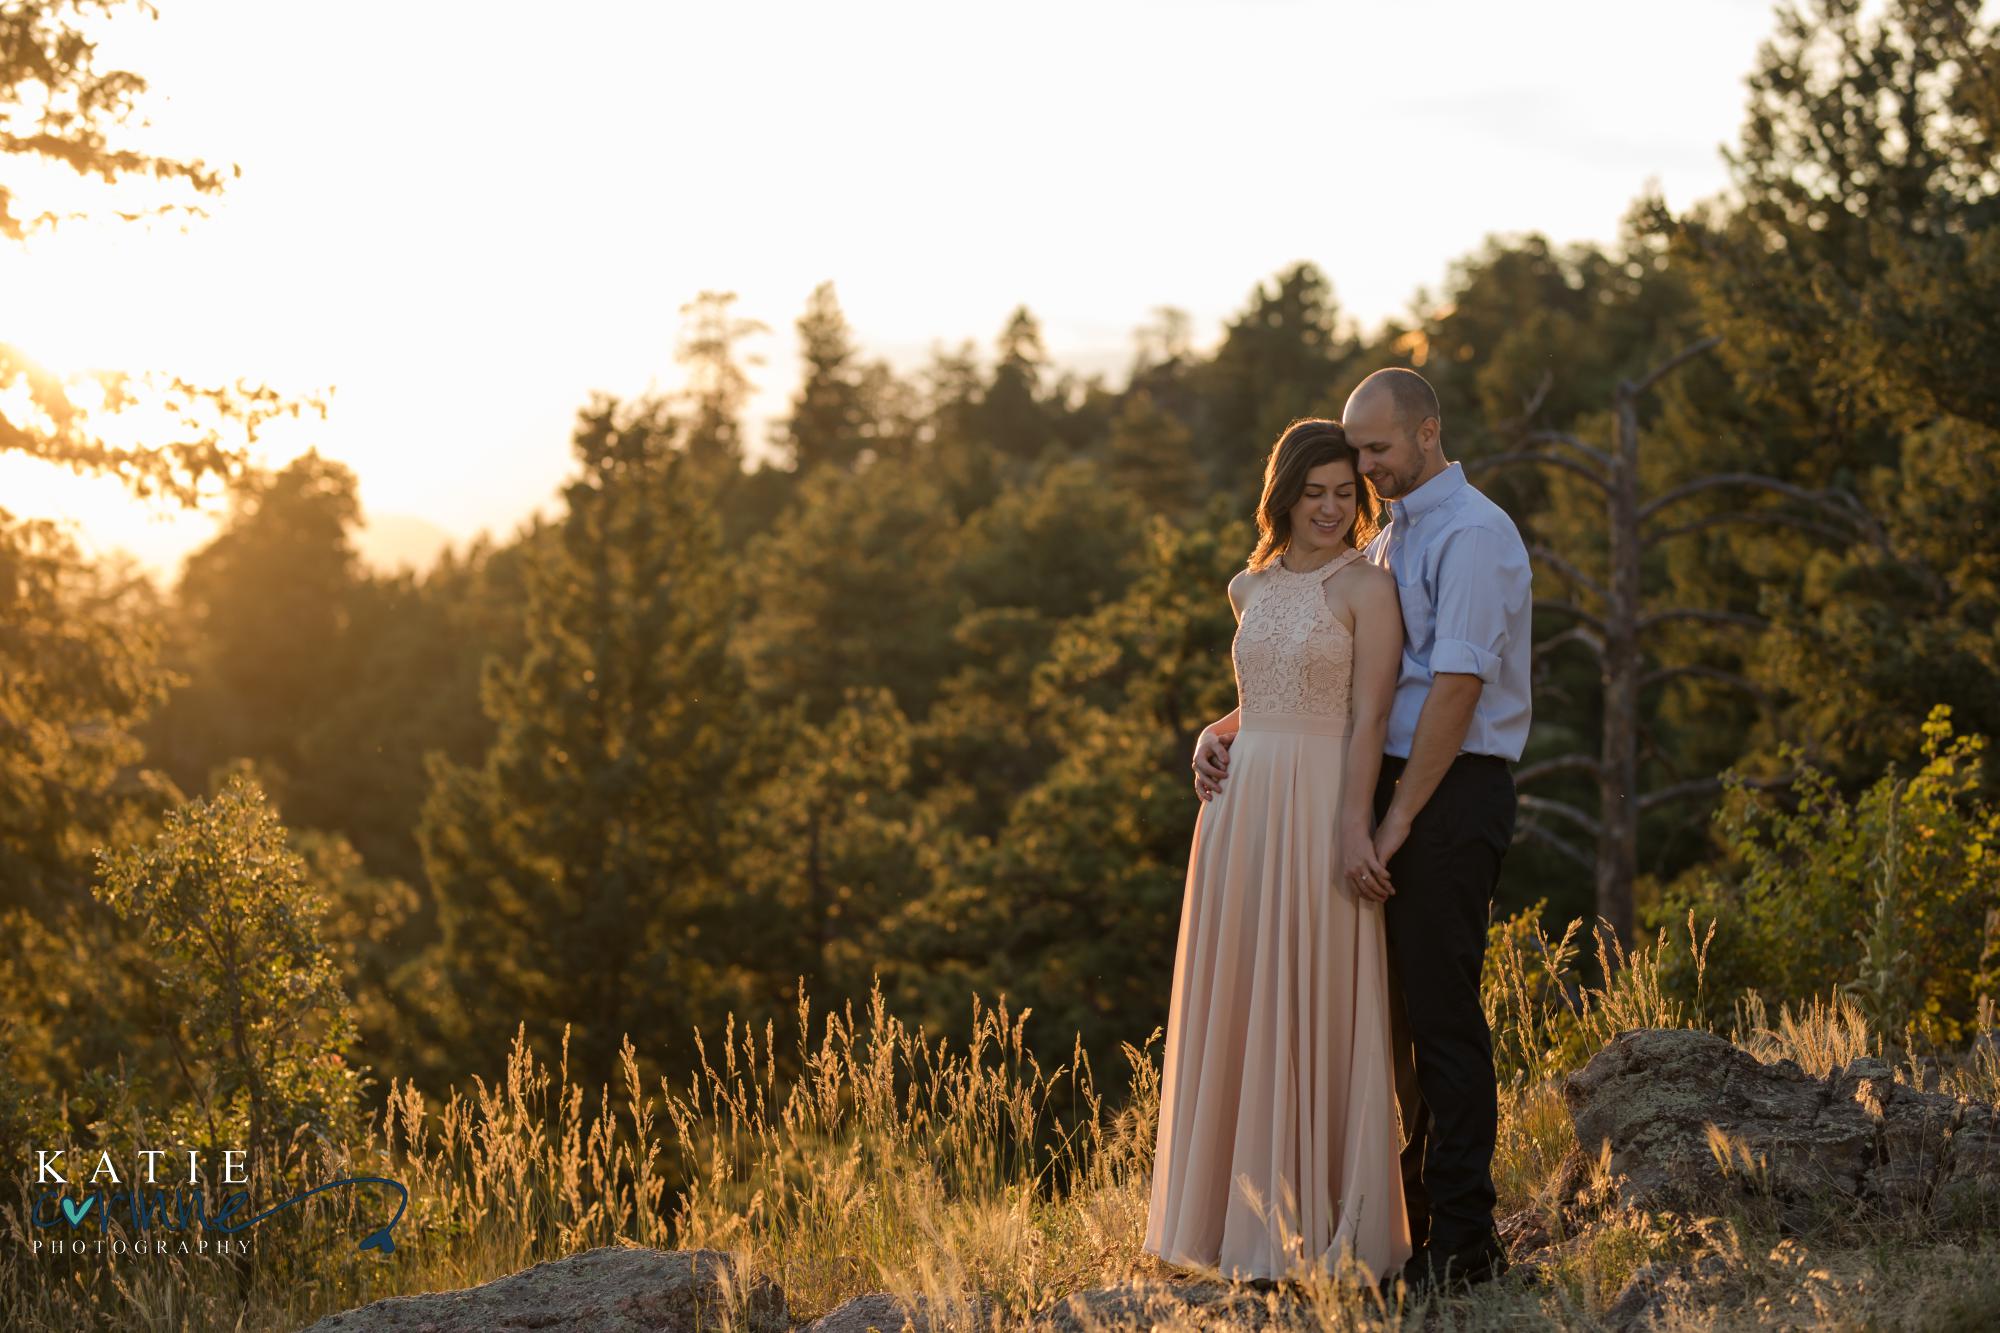 Colorado couple gets photographed during engagement session